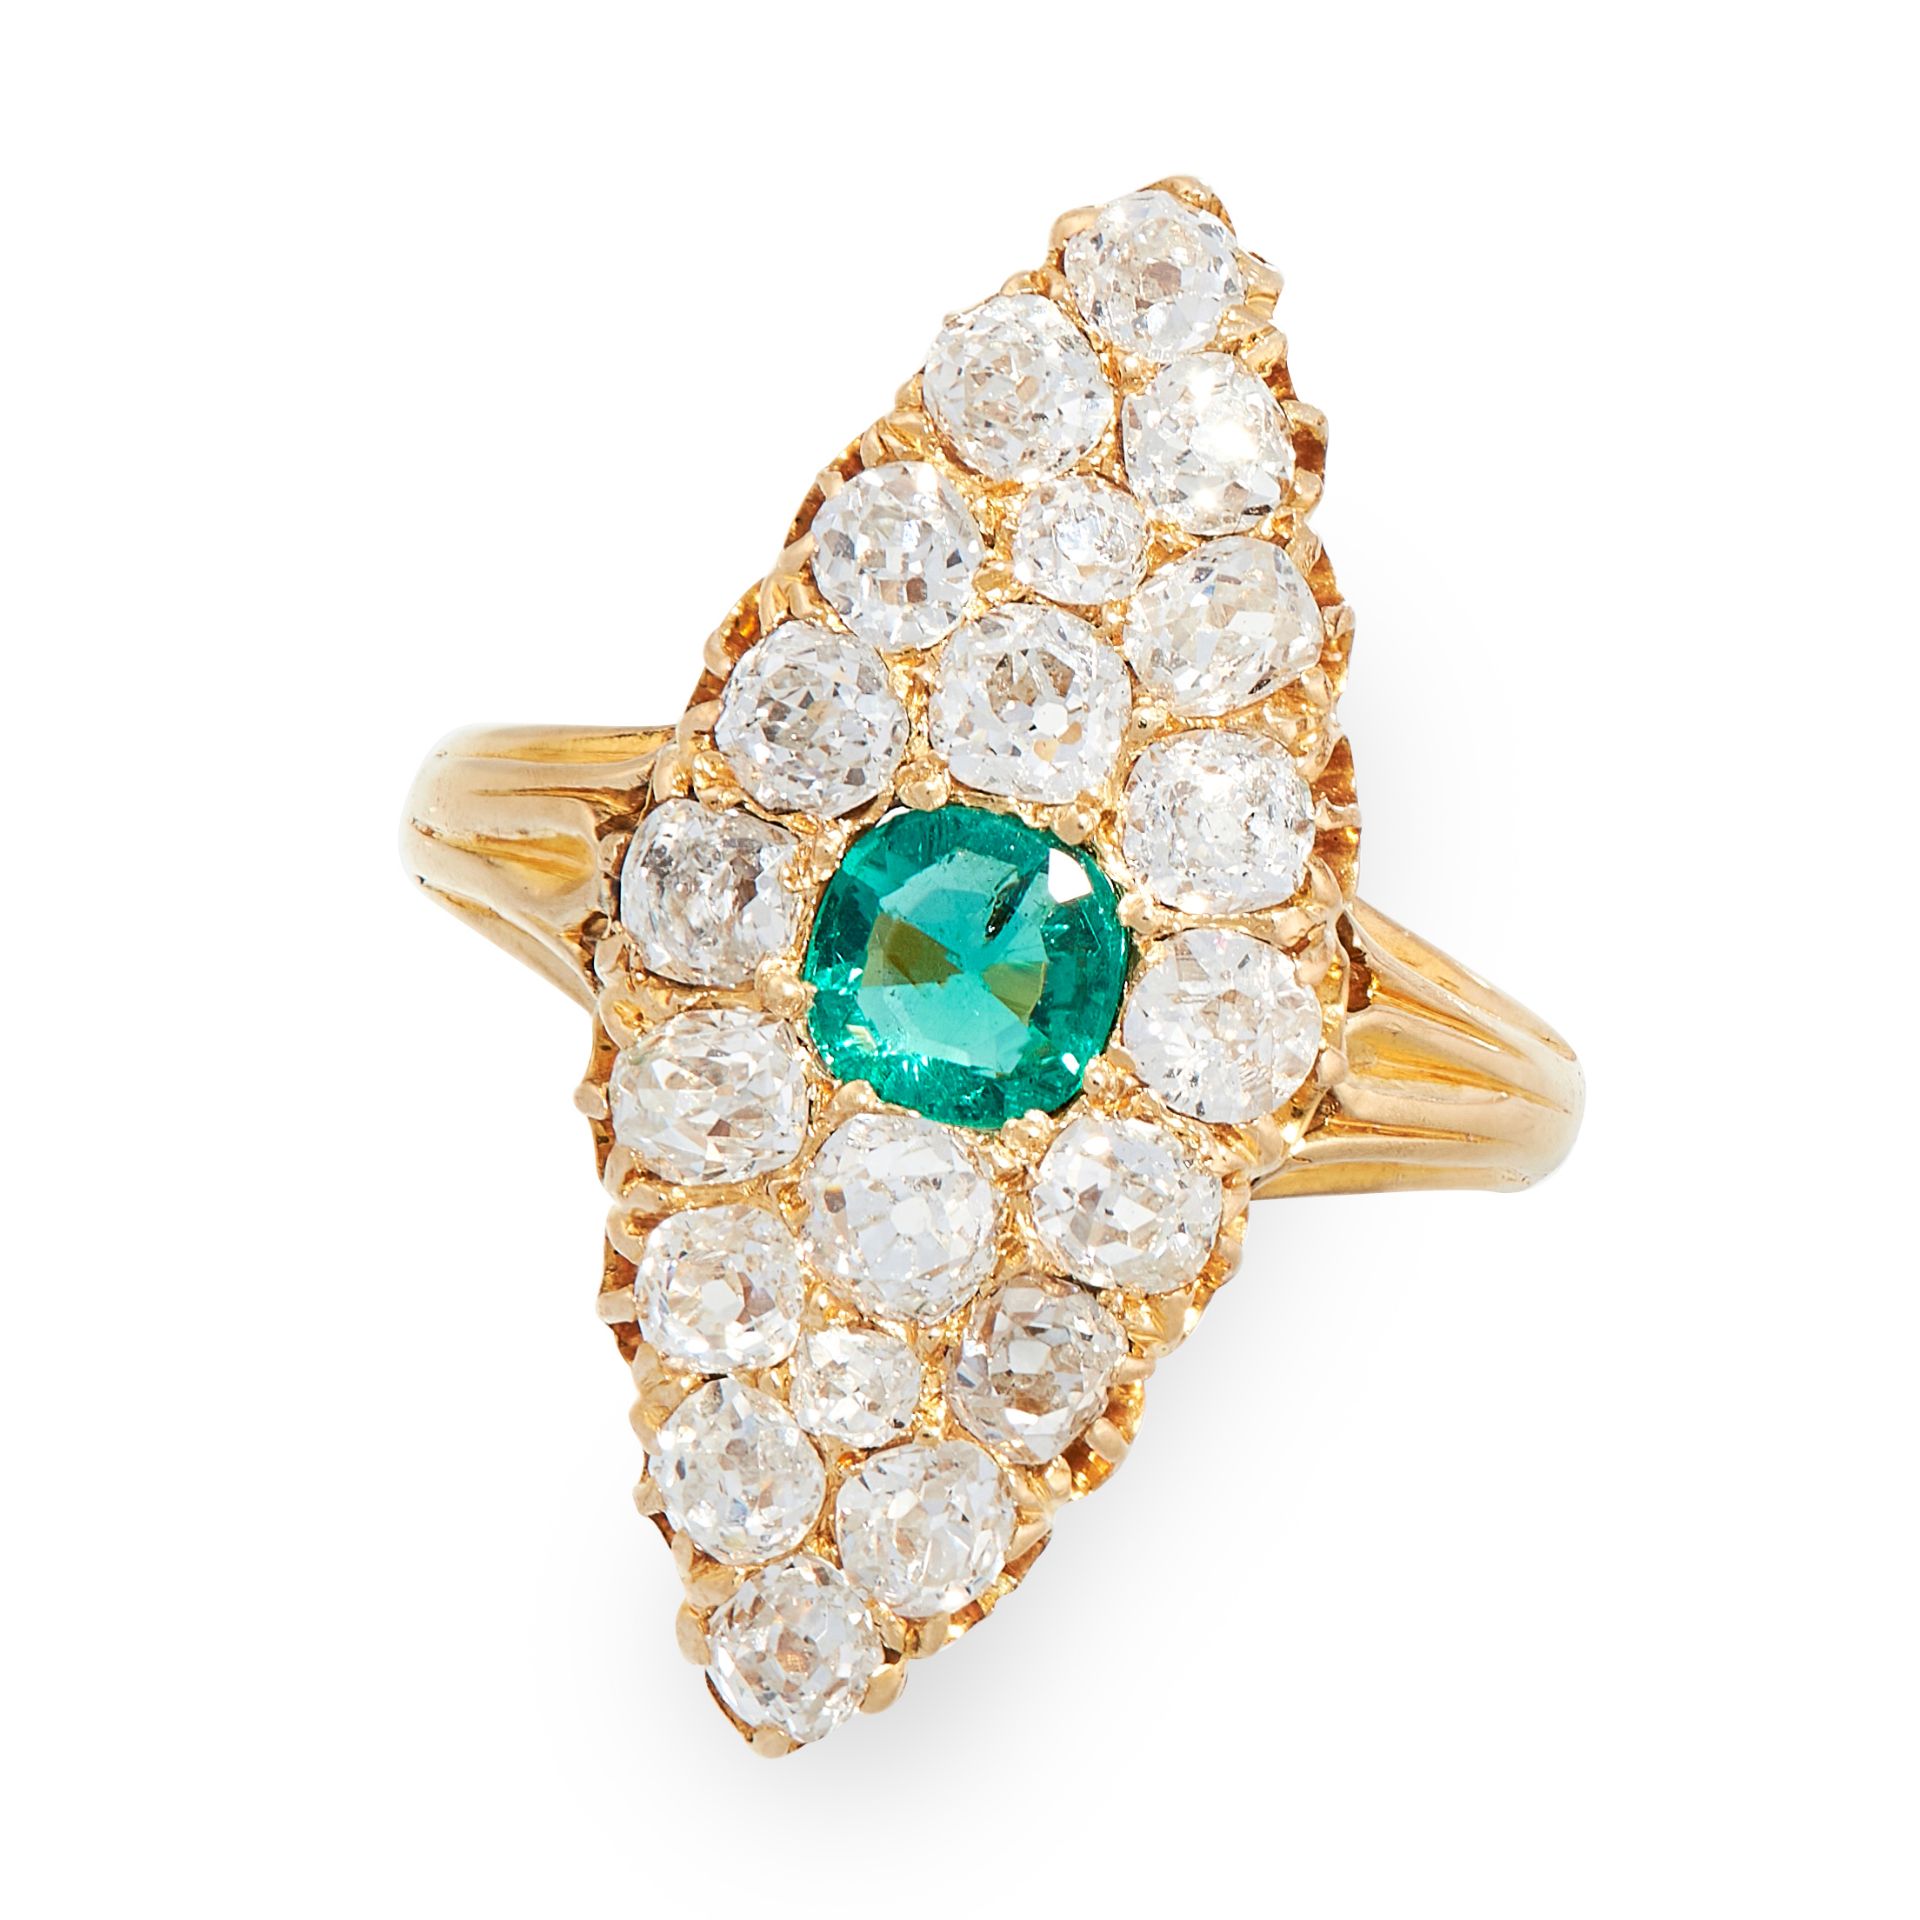 AN ANTIQUE EMERALD AND DIAMOND RING in 18ct yellow gold, the navette face set with a central cushion